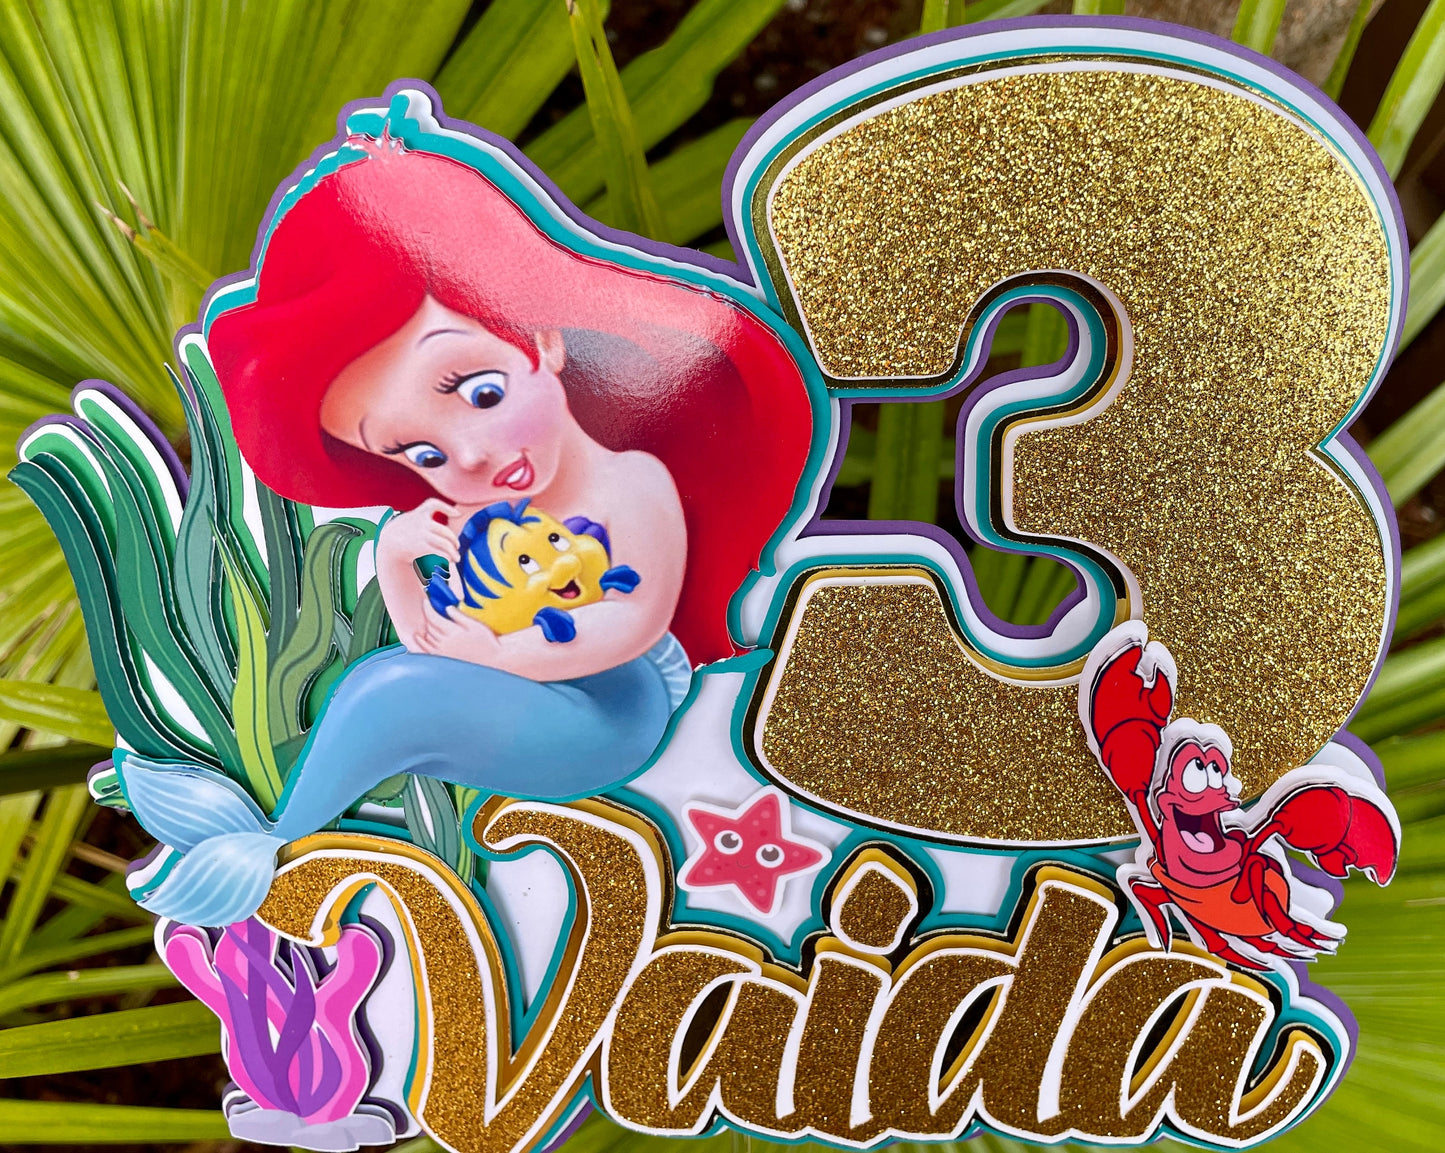 Baby Little Mermaid Cake Topper | The Little Mermaid Birthday | Disney Ariel Cake Topper | Mermaid Birthday Party | Princess | Under The Sea